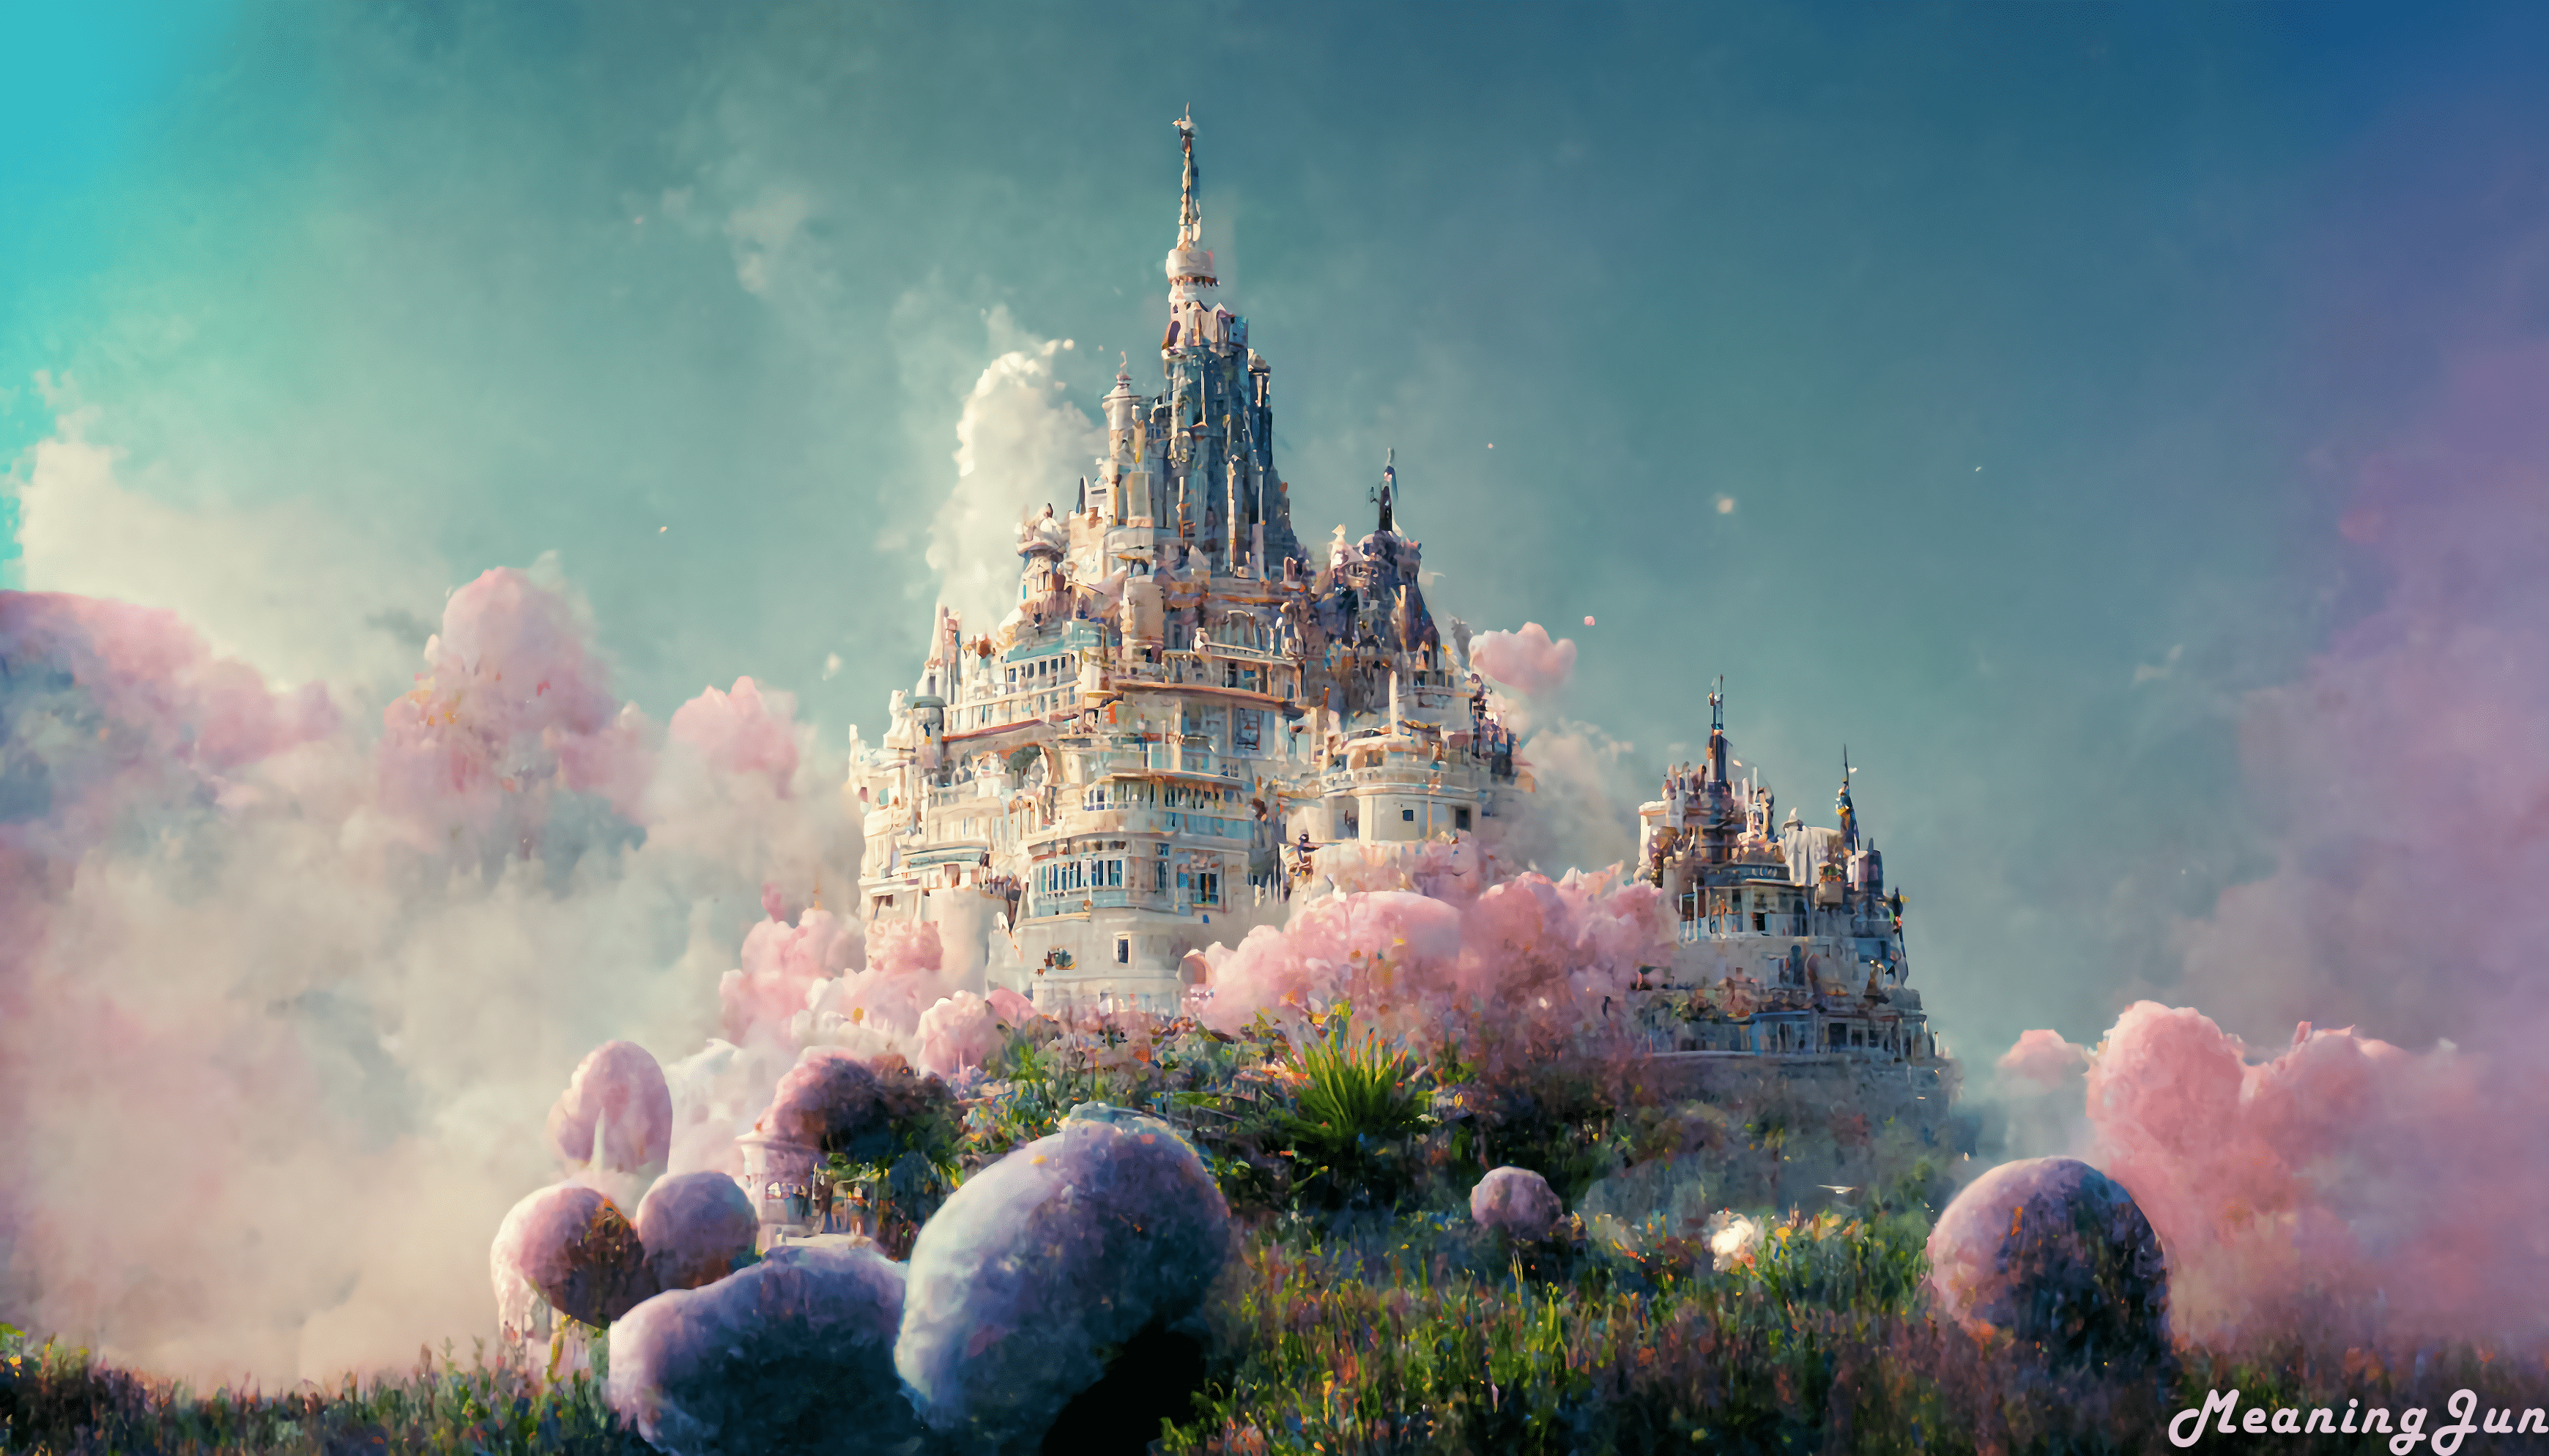 A castle with pink clouds and flowers - Castle